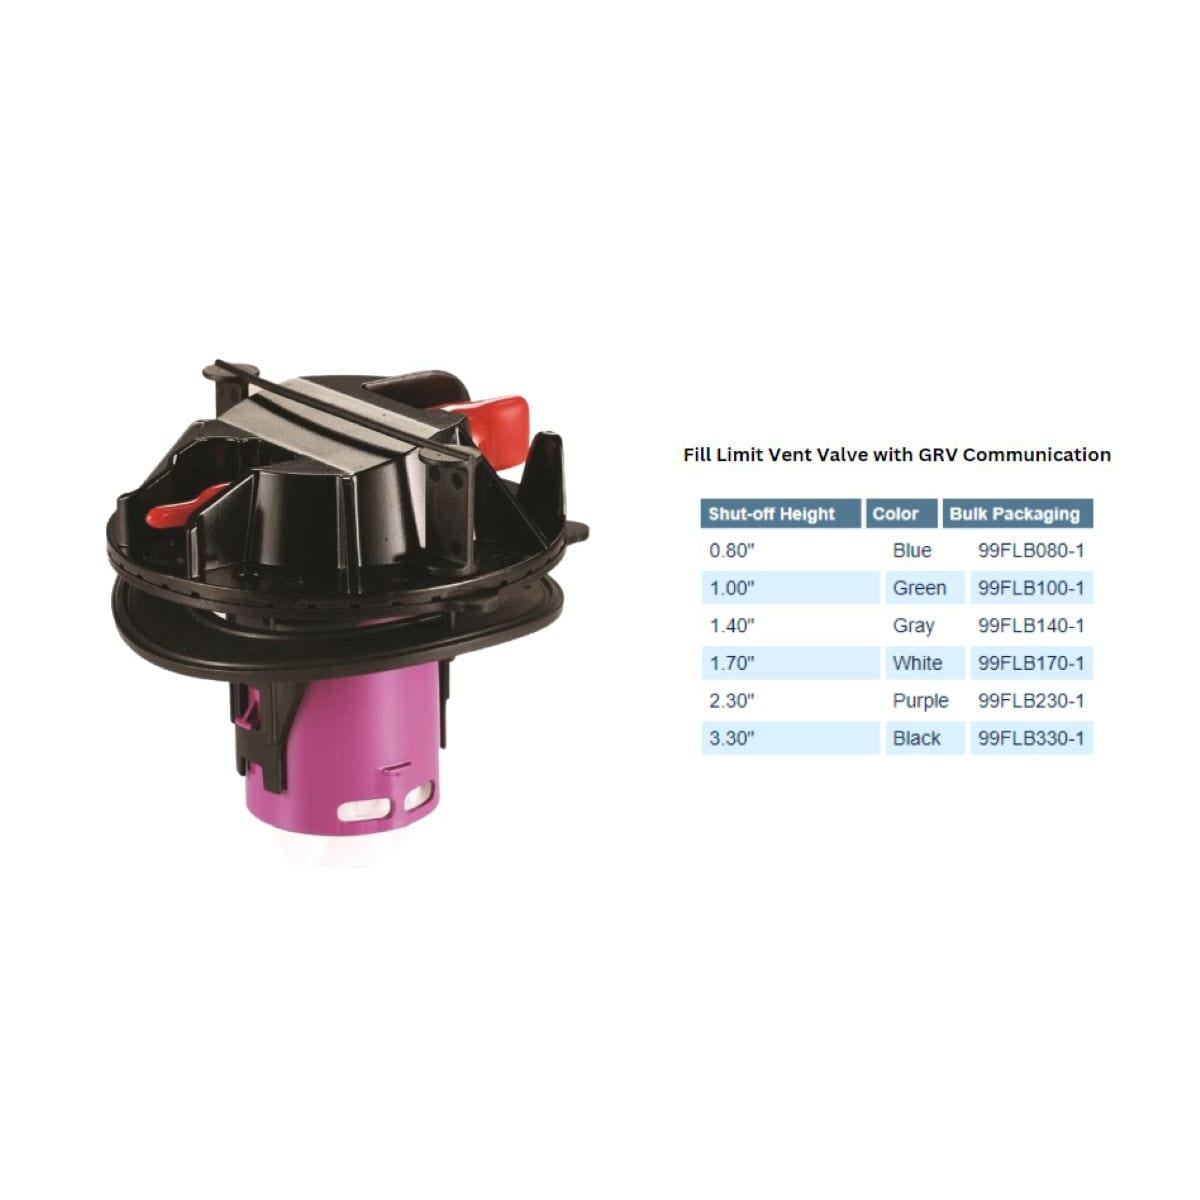 Attwood Marine Qualifies for Free Shipping Attwood Fuel Limit Vent Valve 1.4 Gray #99FLB140-1S